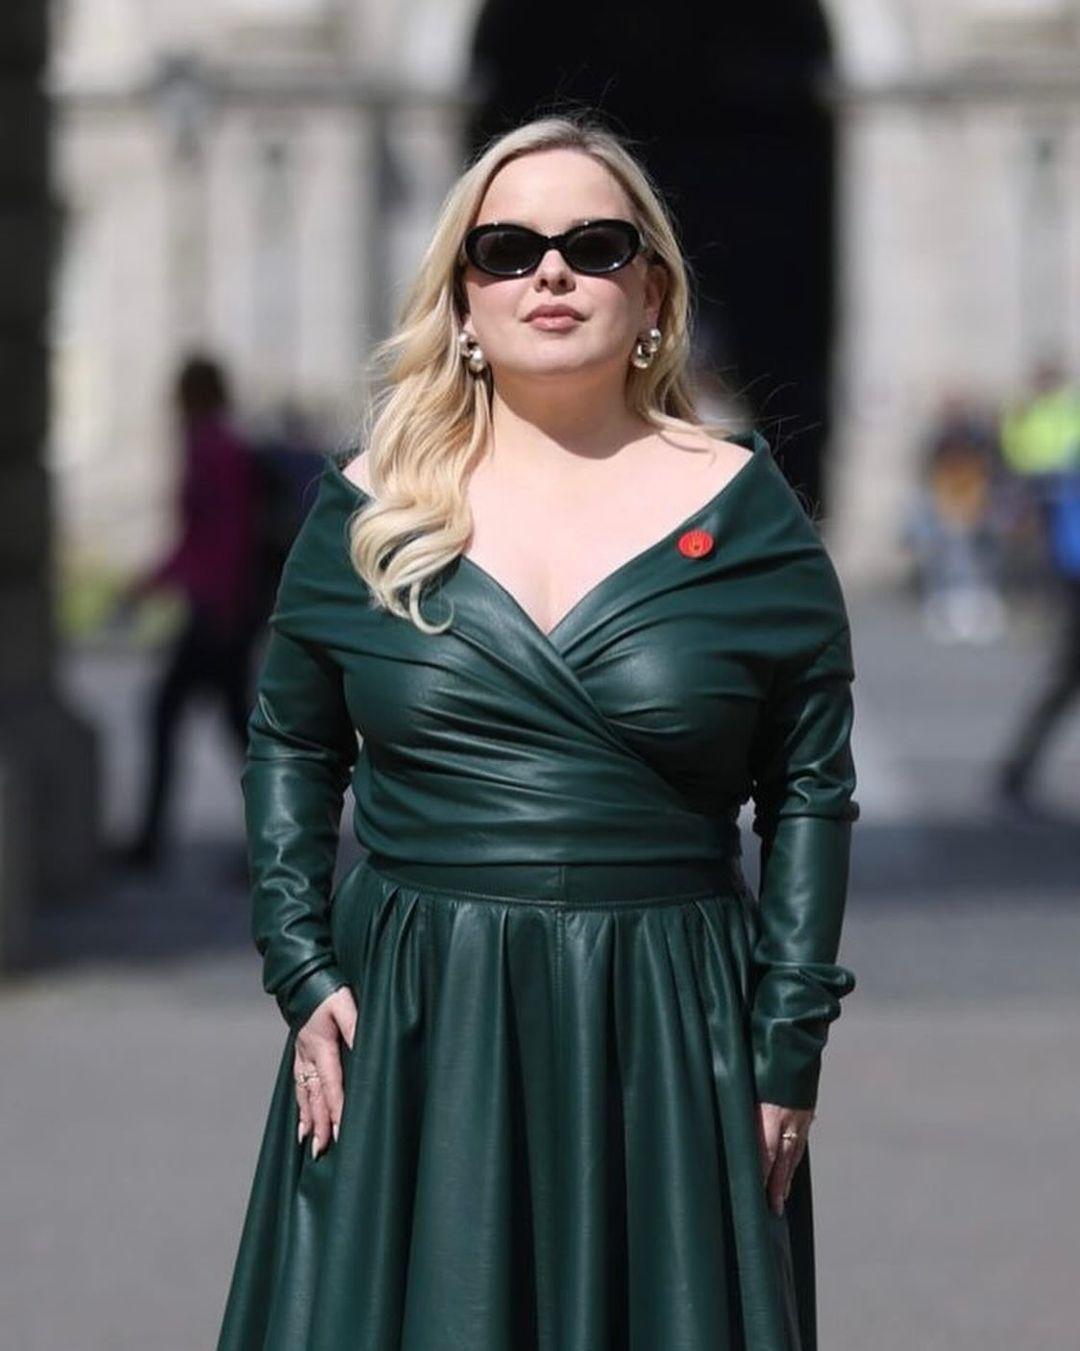 In another picture, Nicola looked stunning in an off-shoulder green button-up shirt dress. The form-fitting dress accentuated her curvaceous figure.